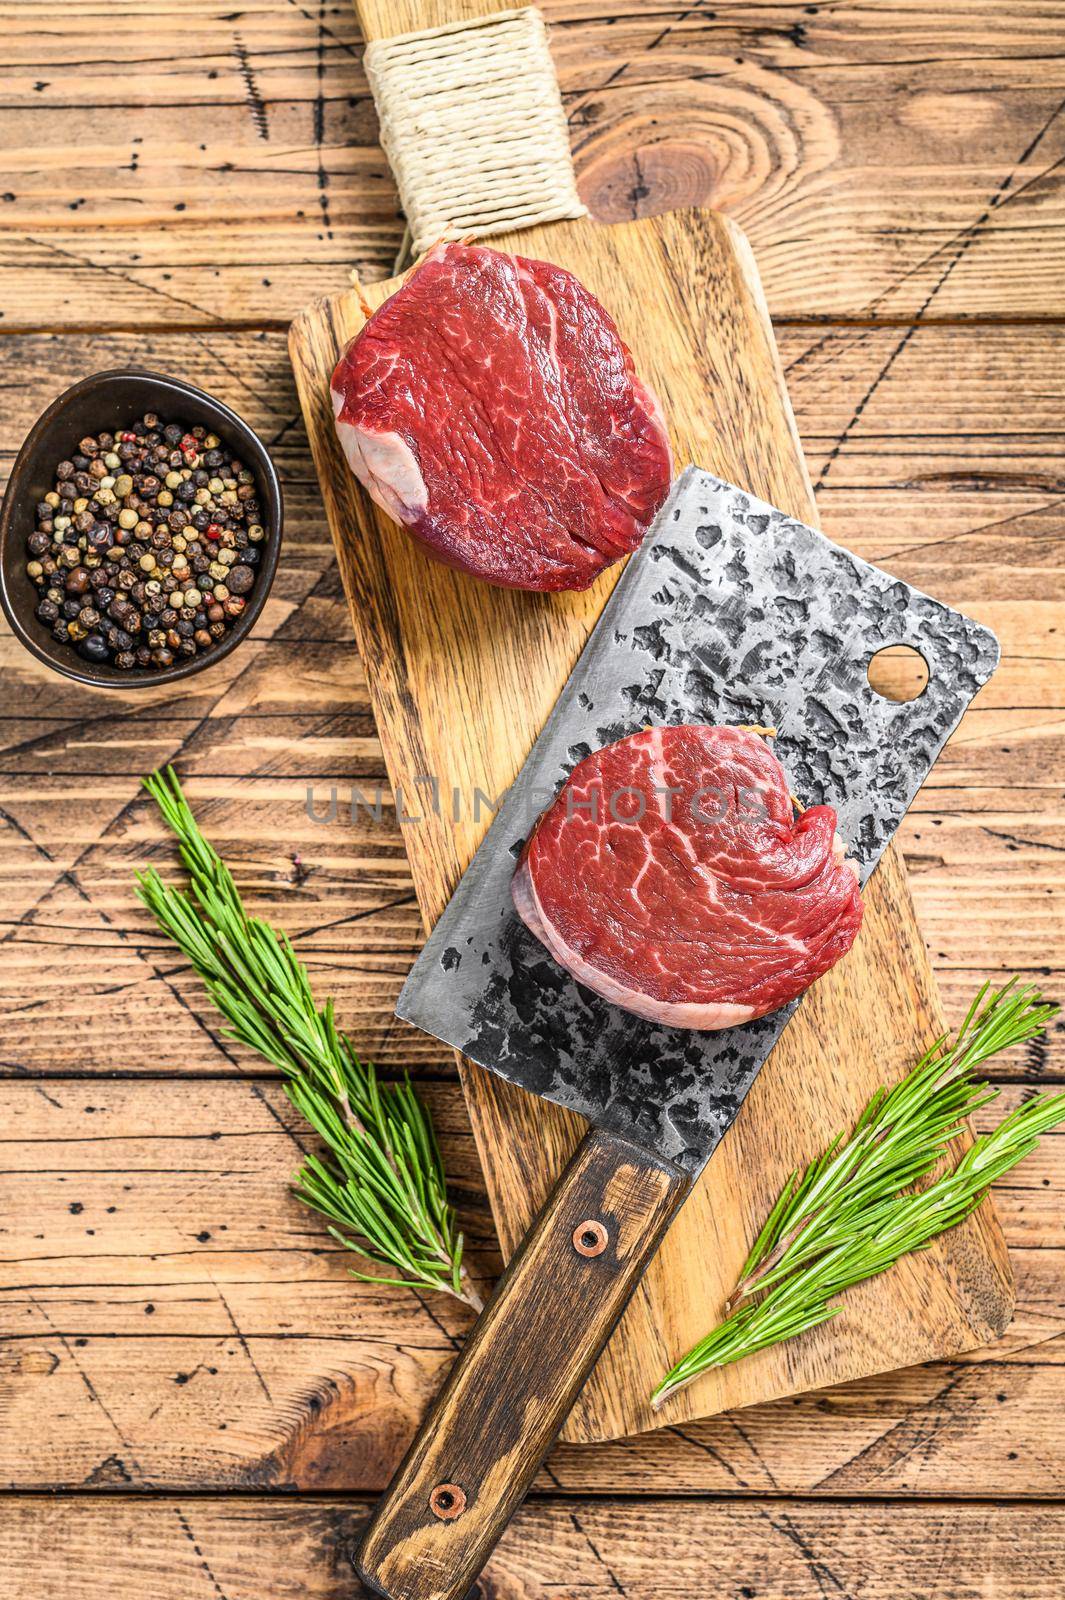 Raw fresh marbled meat Steak fillet mignon. Wooden background. Top view.